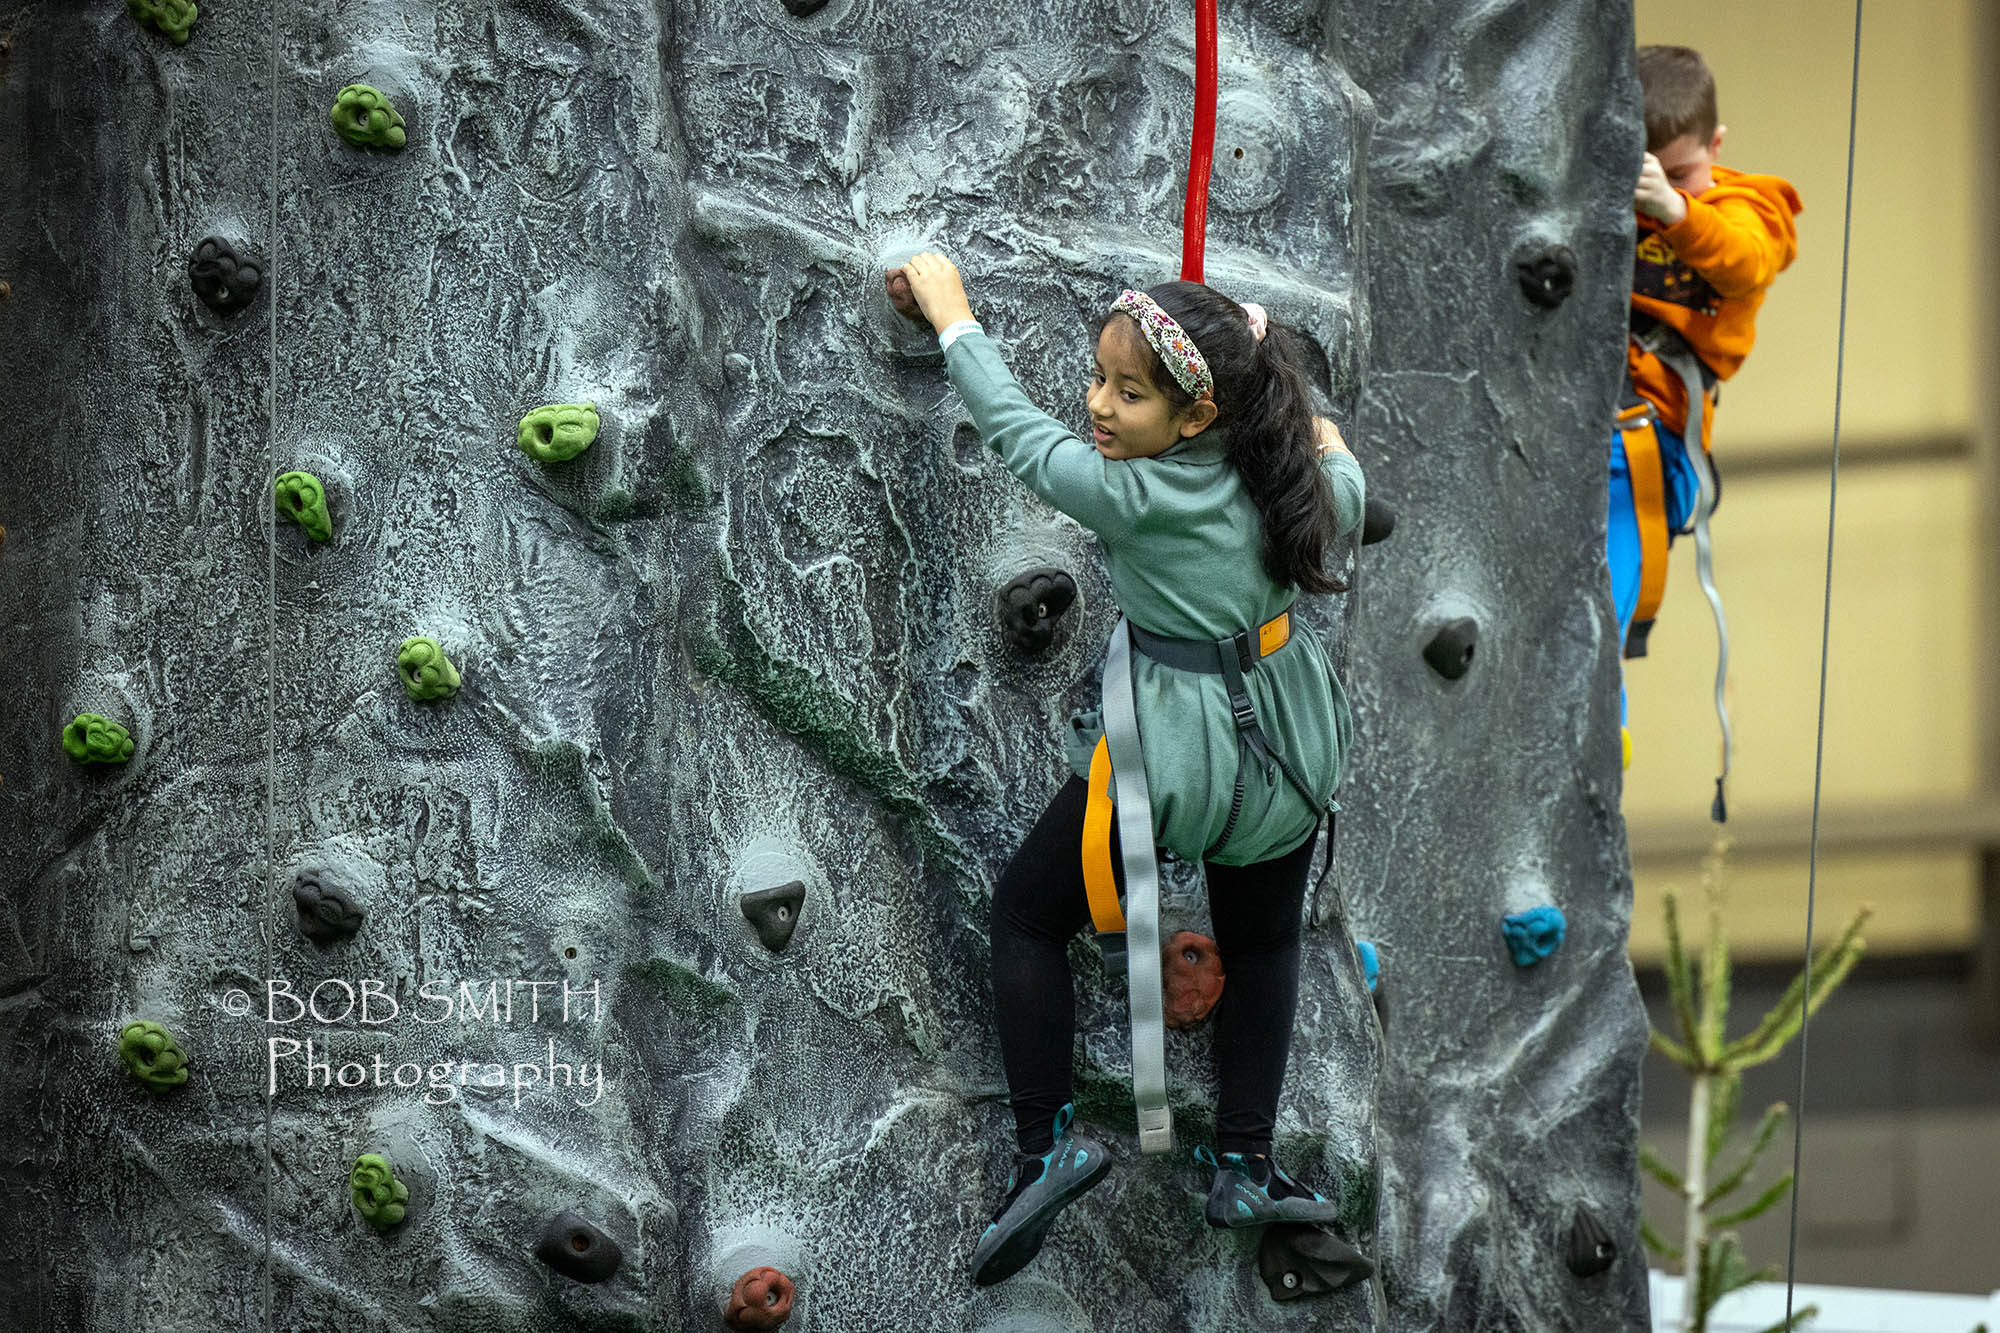 Youngsters emjoy the climbing wall at the National Outdoor Expo